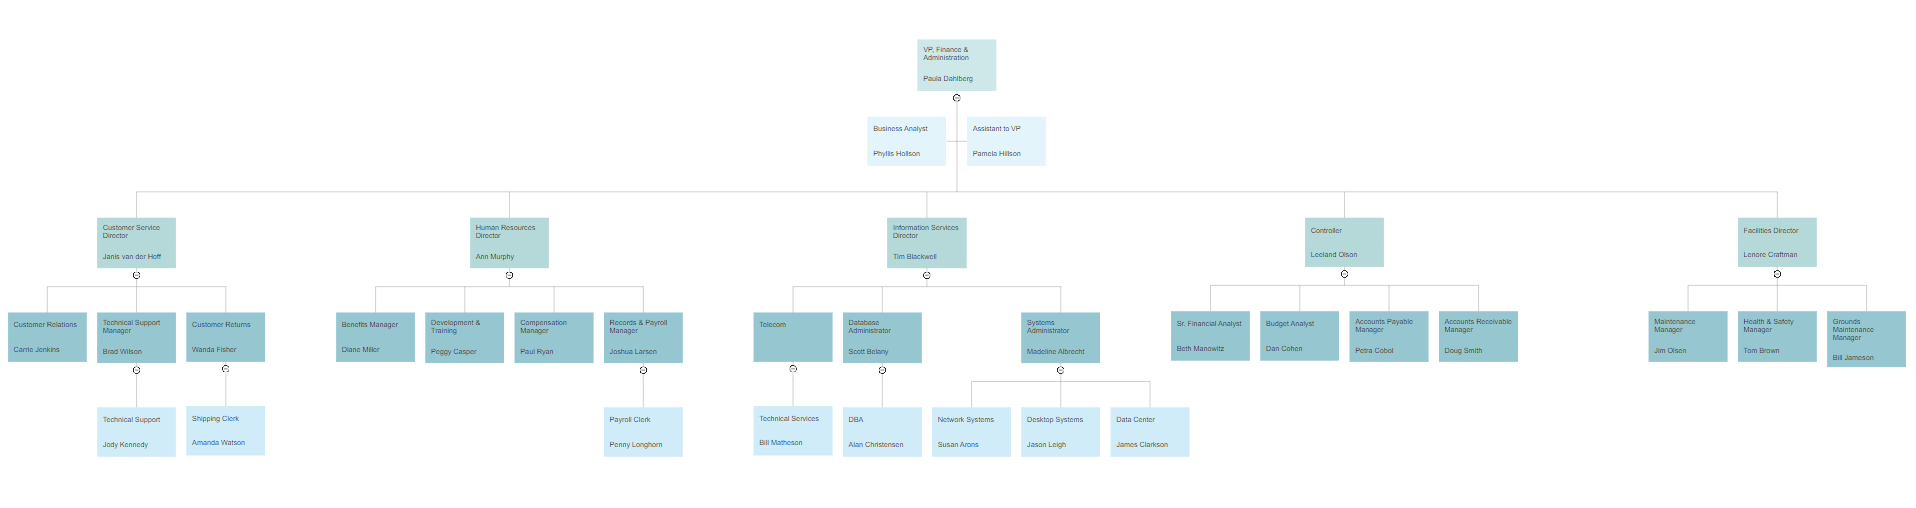 Creating An Org Chart In Google Sheets